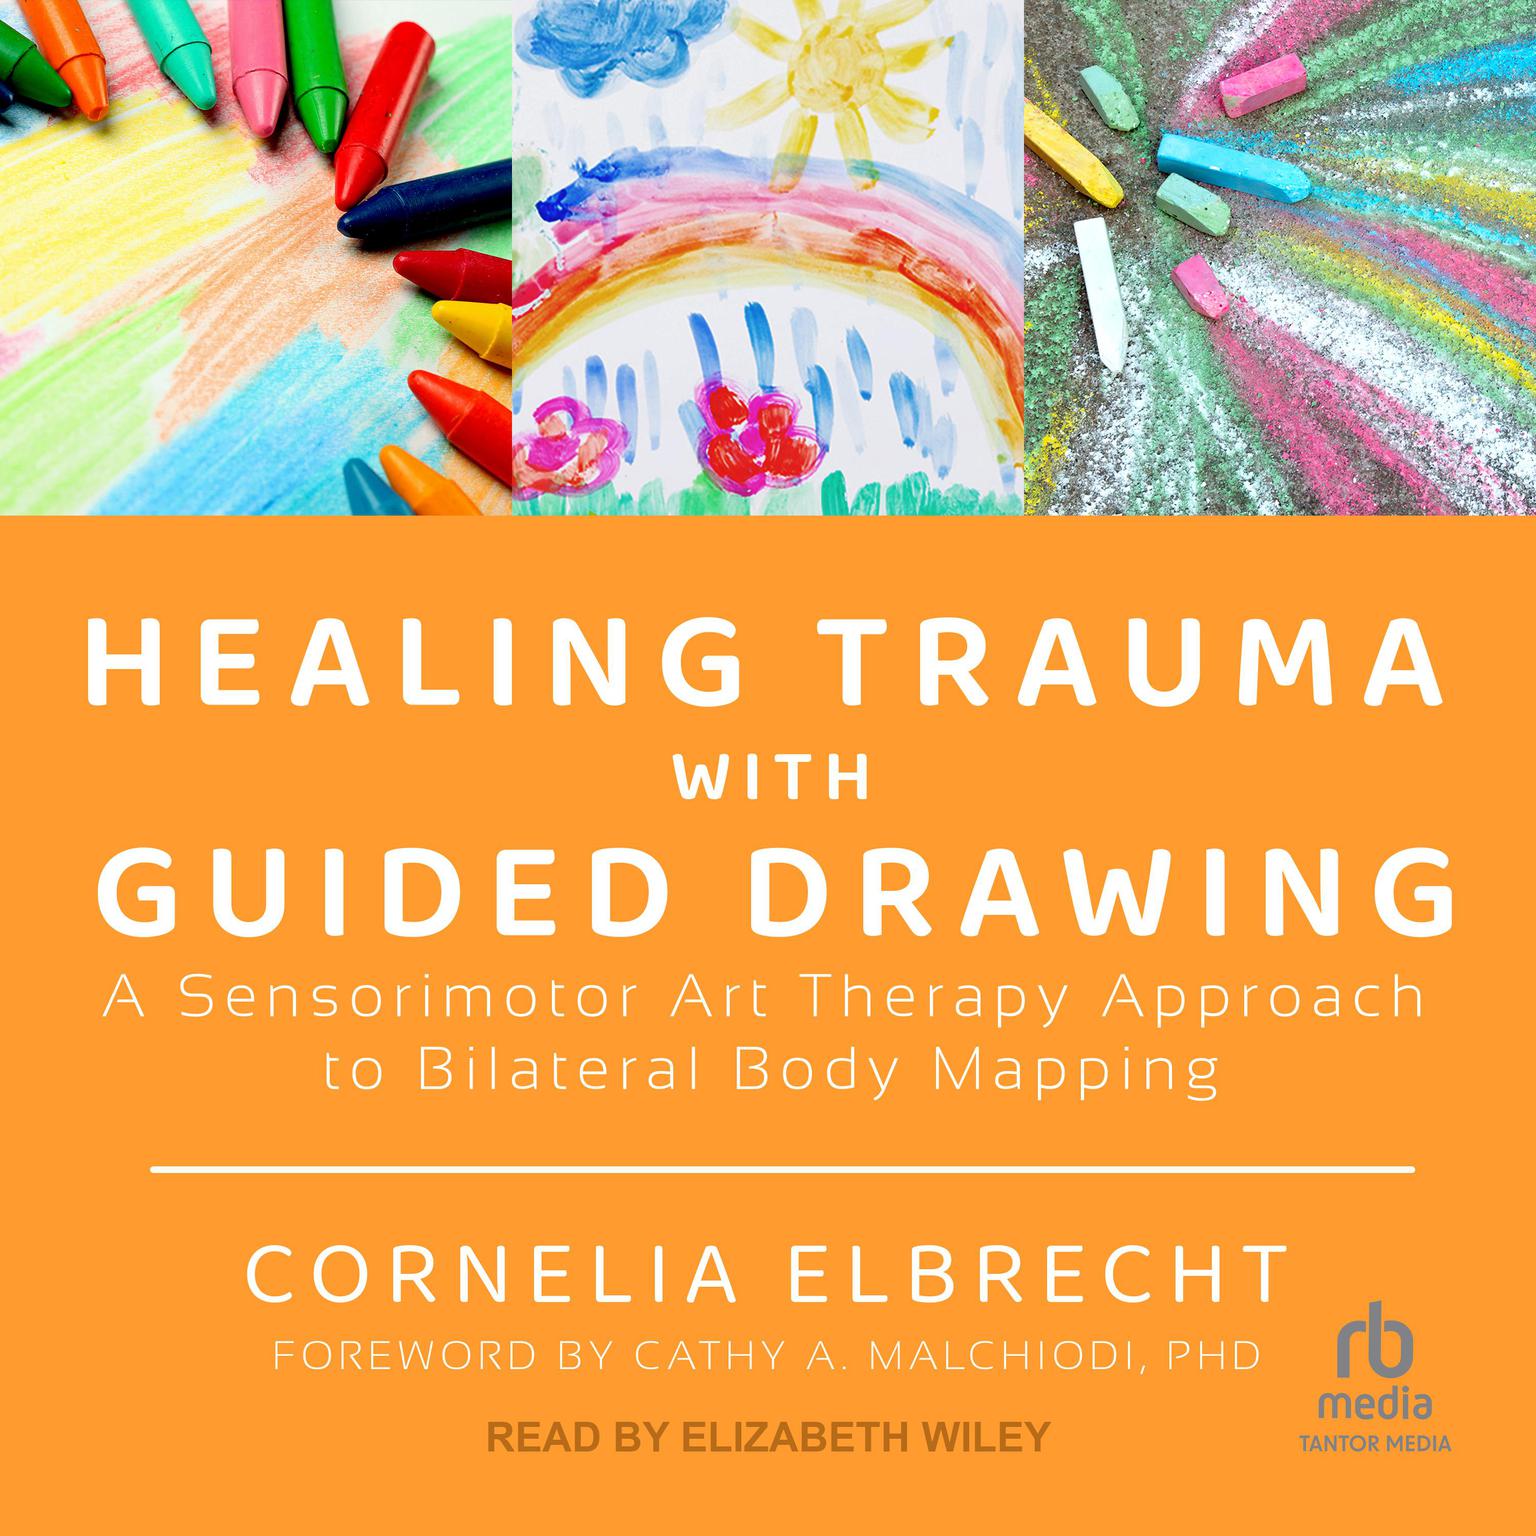 Healing Trauma with Guided Drawing: A Sensorimotor Art Therapy Approach to Bilateral Body Mapping Audiobook, by Cornelia Elbrecht